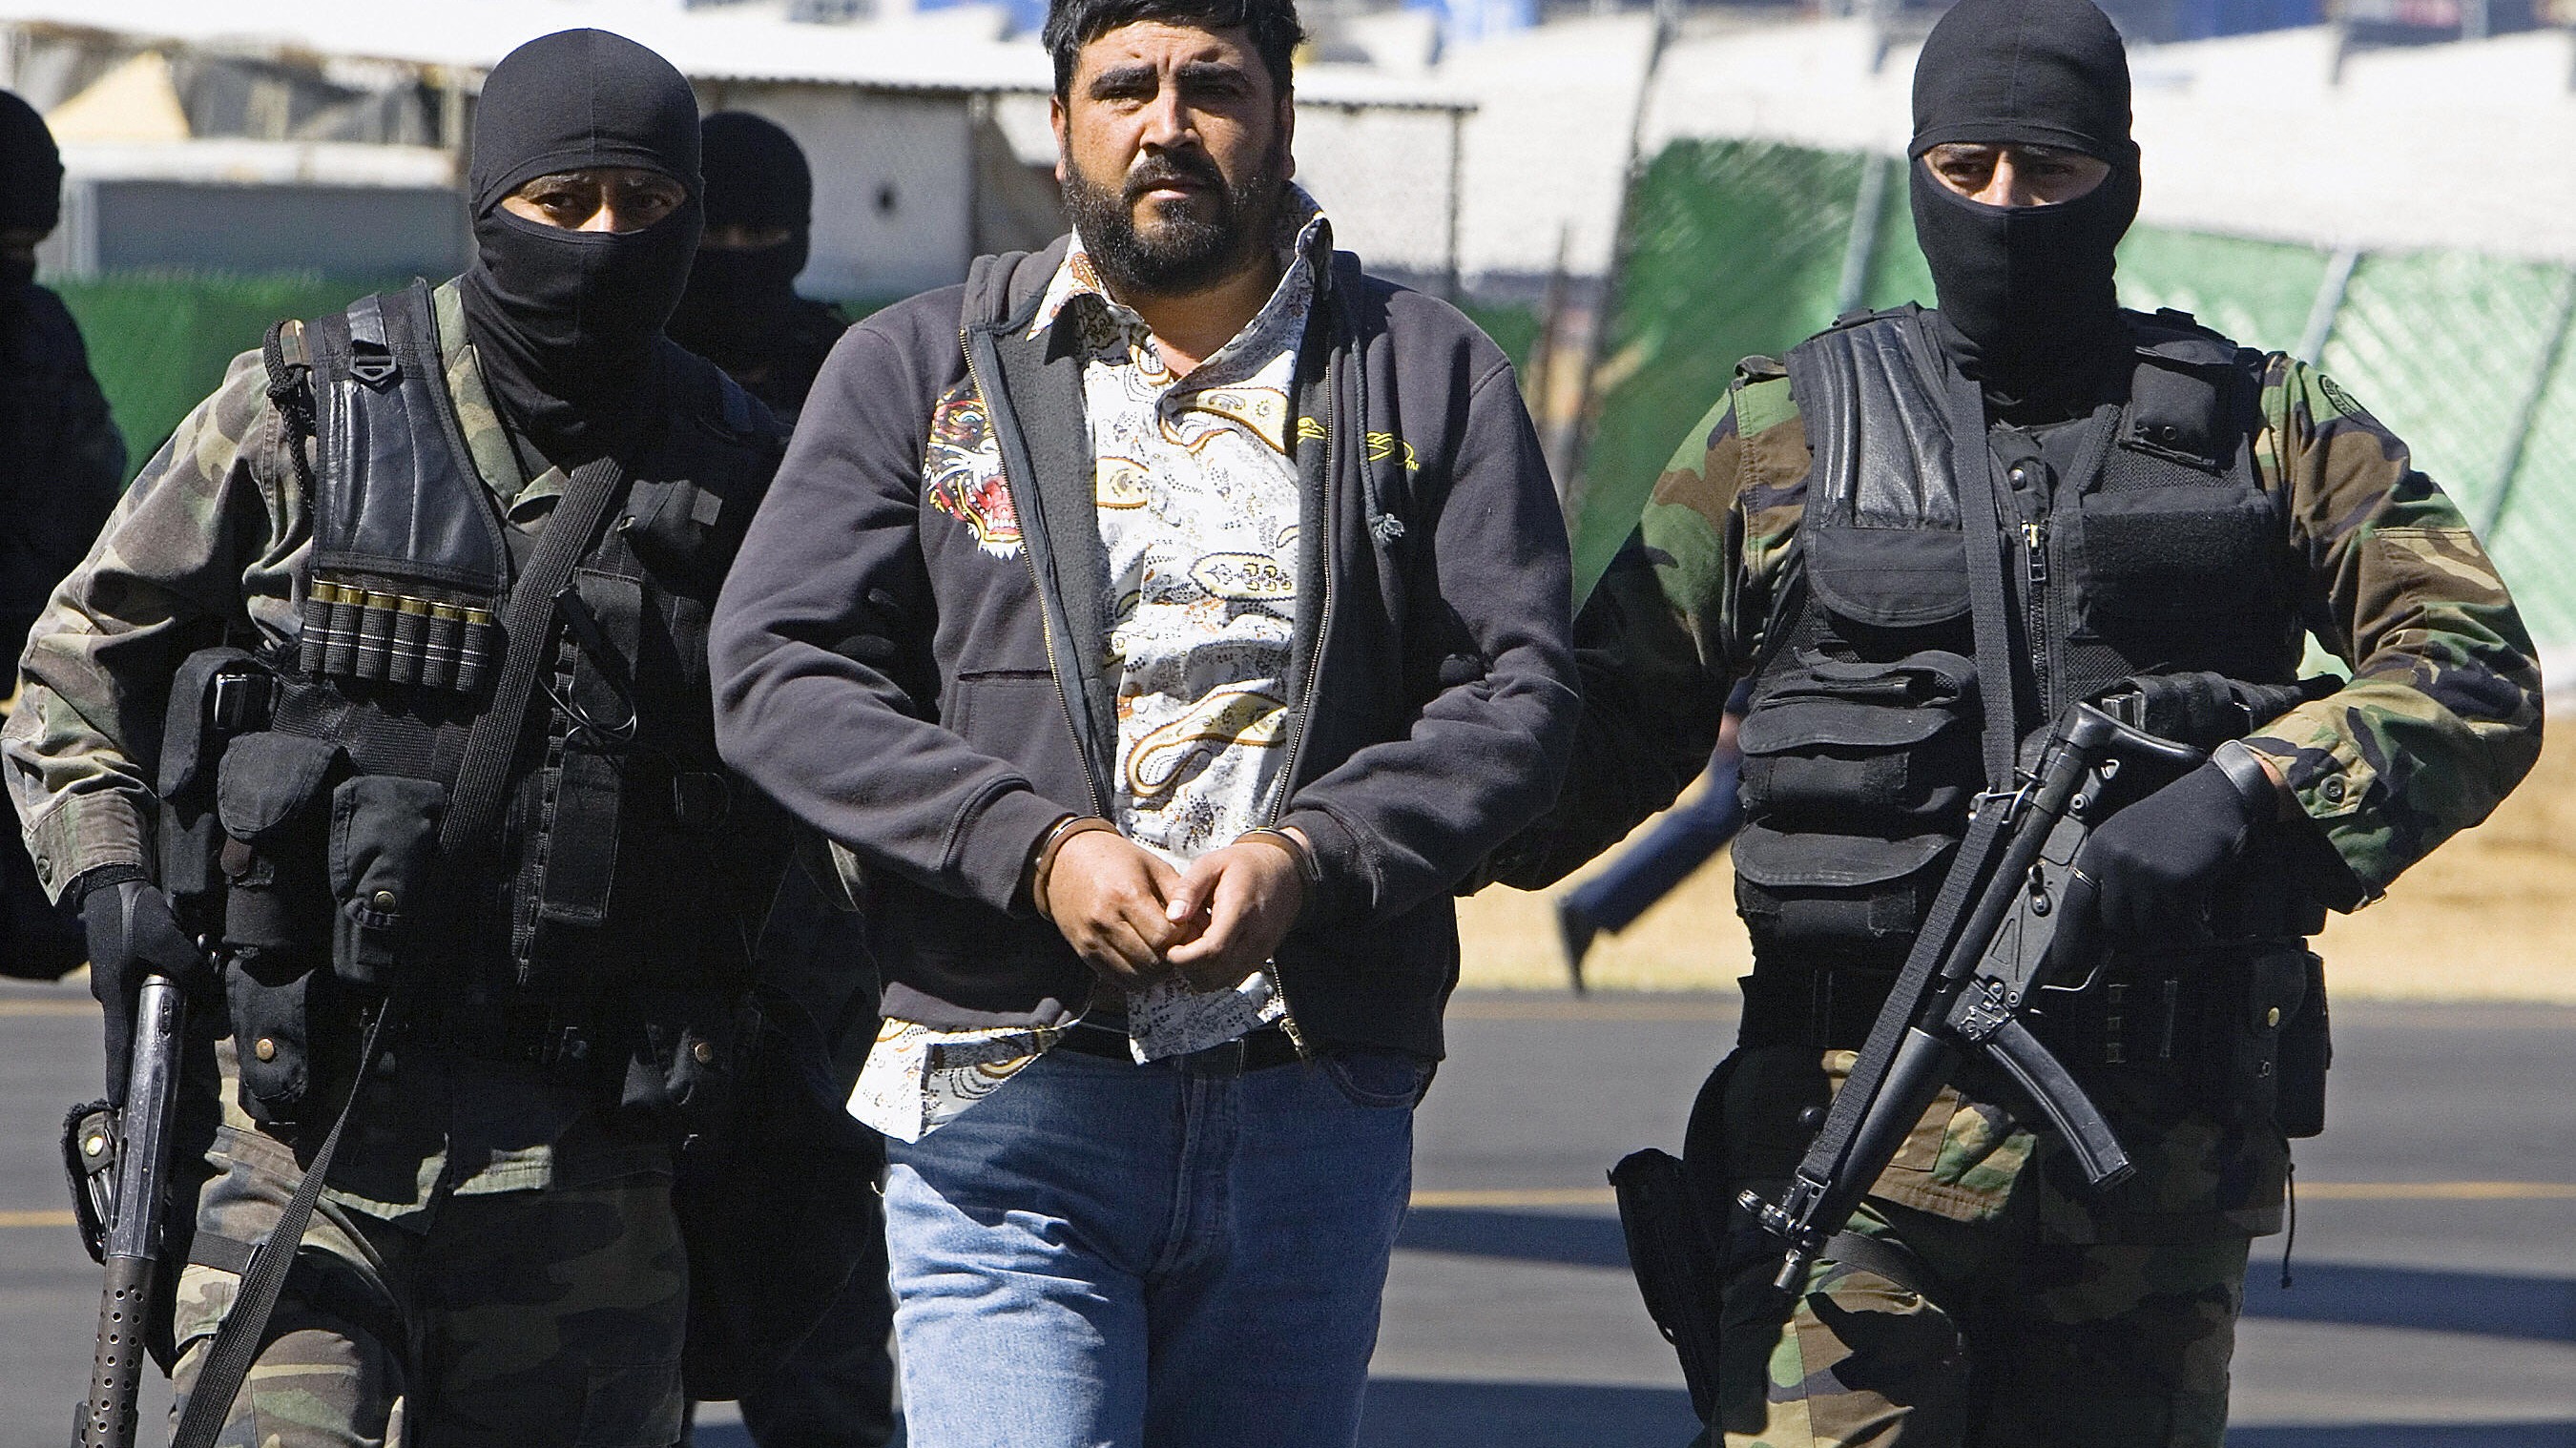 The U.S. wants $500 million in drug money from a Mexican drug lord betrayed...